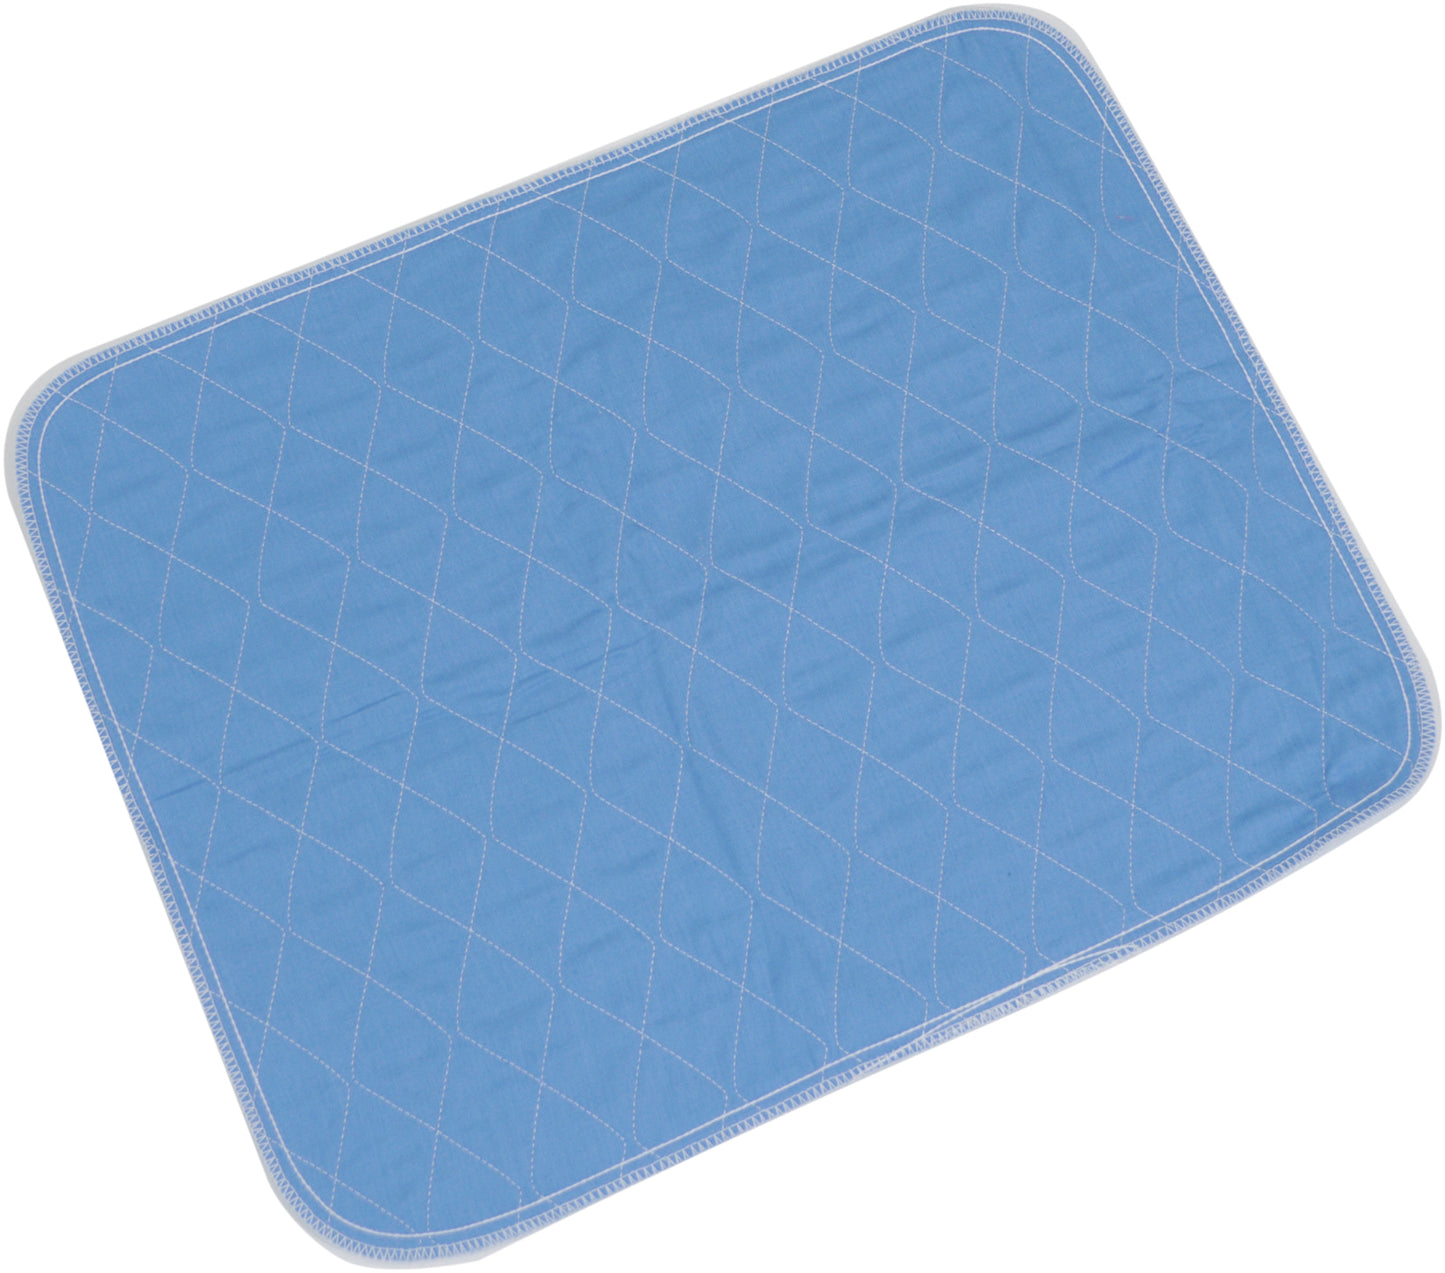 Washable underlay / Incontinence mat for the chair